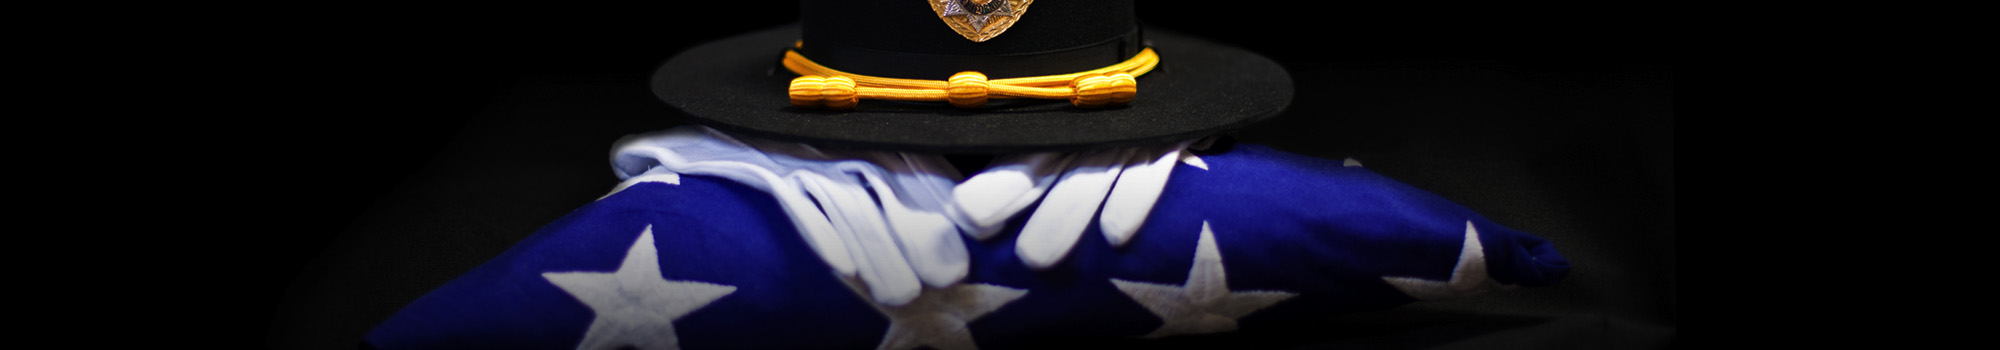 Memorial hat, flag, and gloves